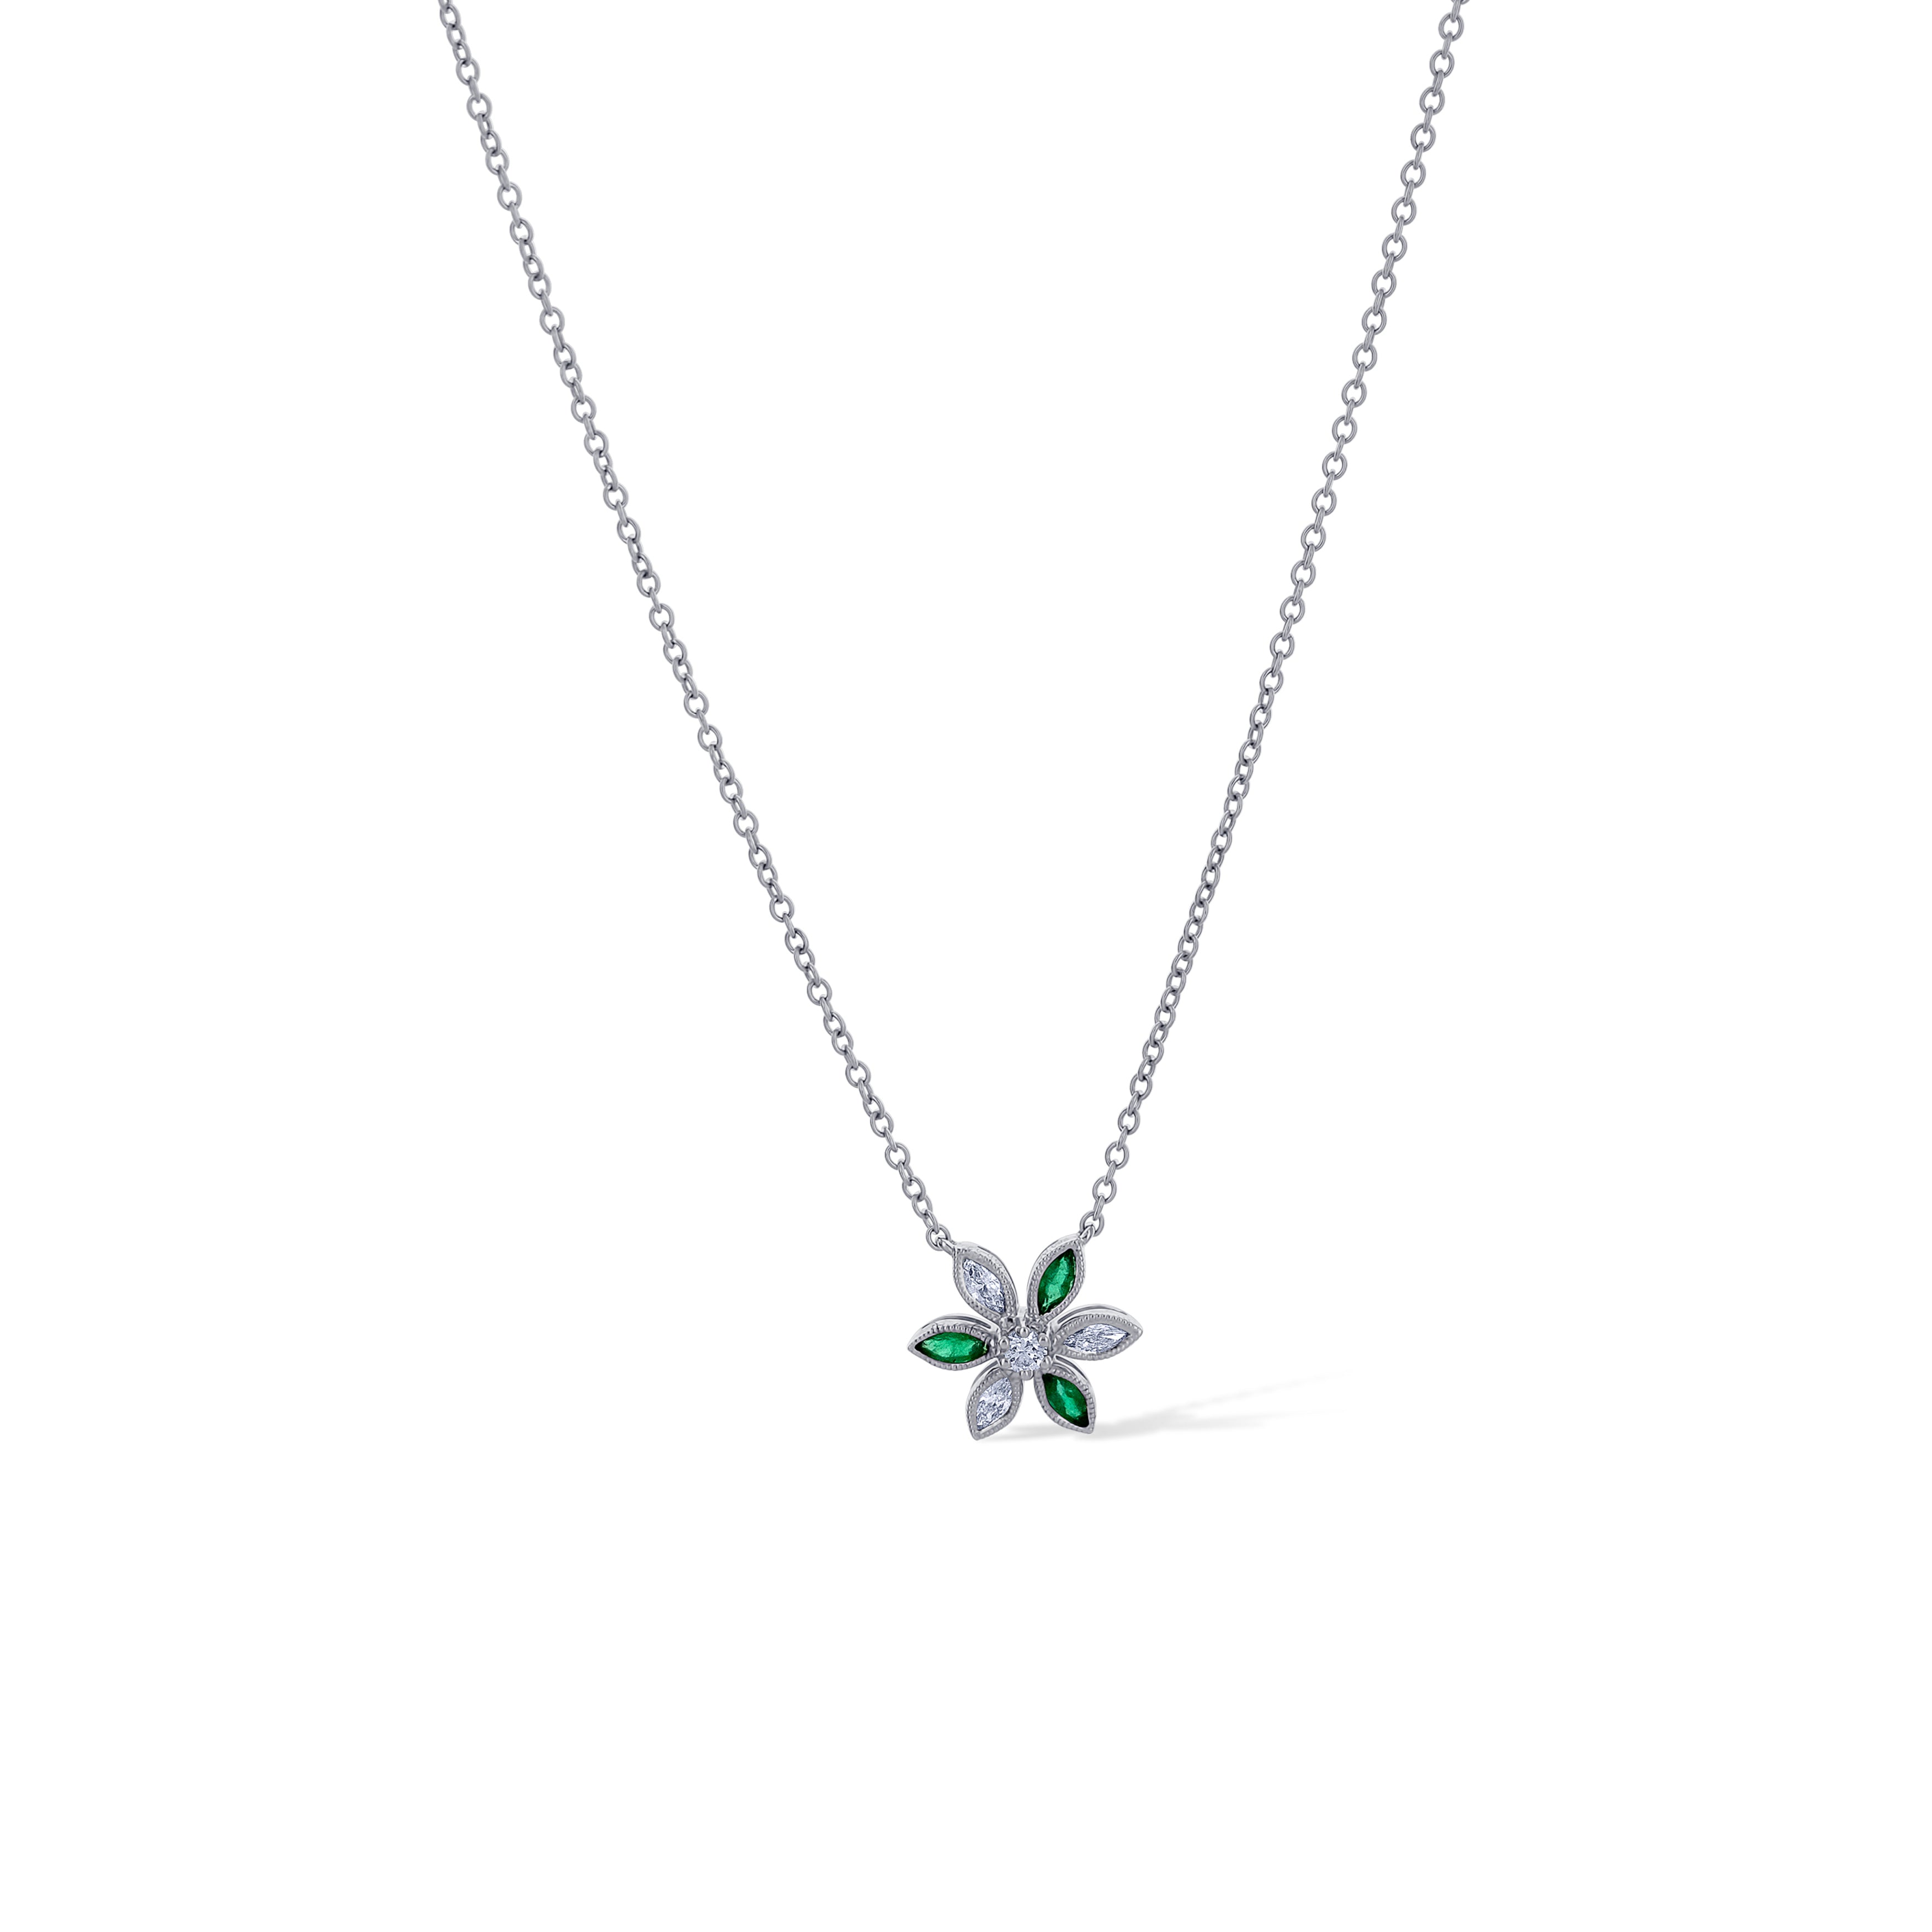 18K White Gold Diamond and Emerald Flower Design Necklace